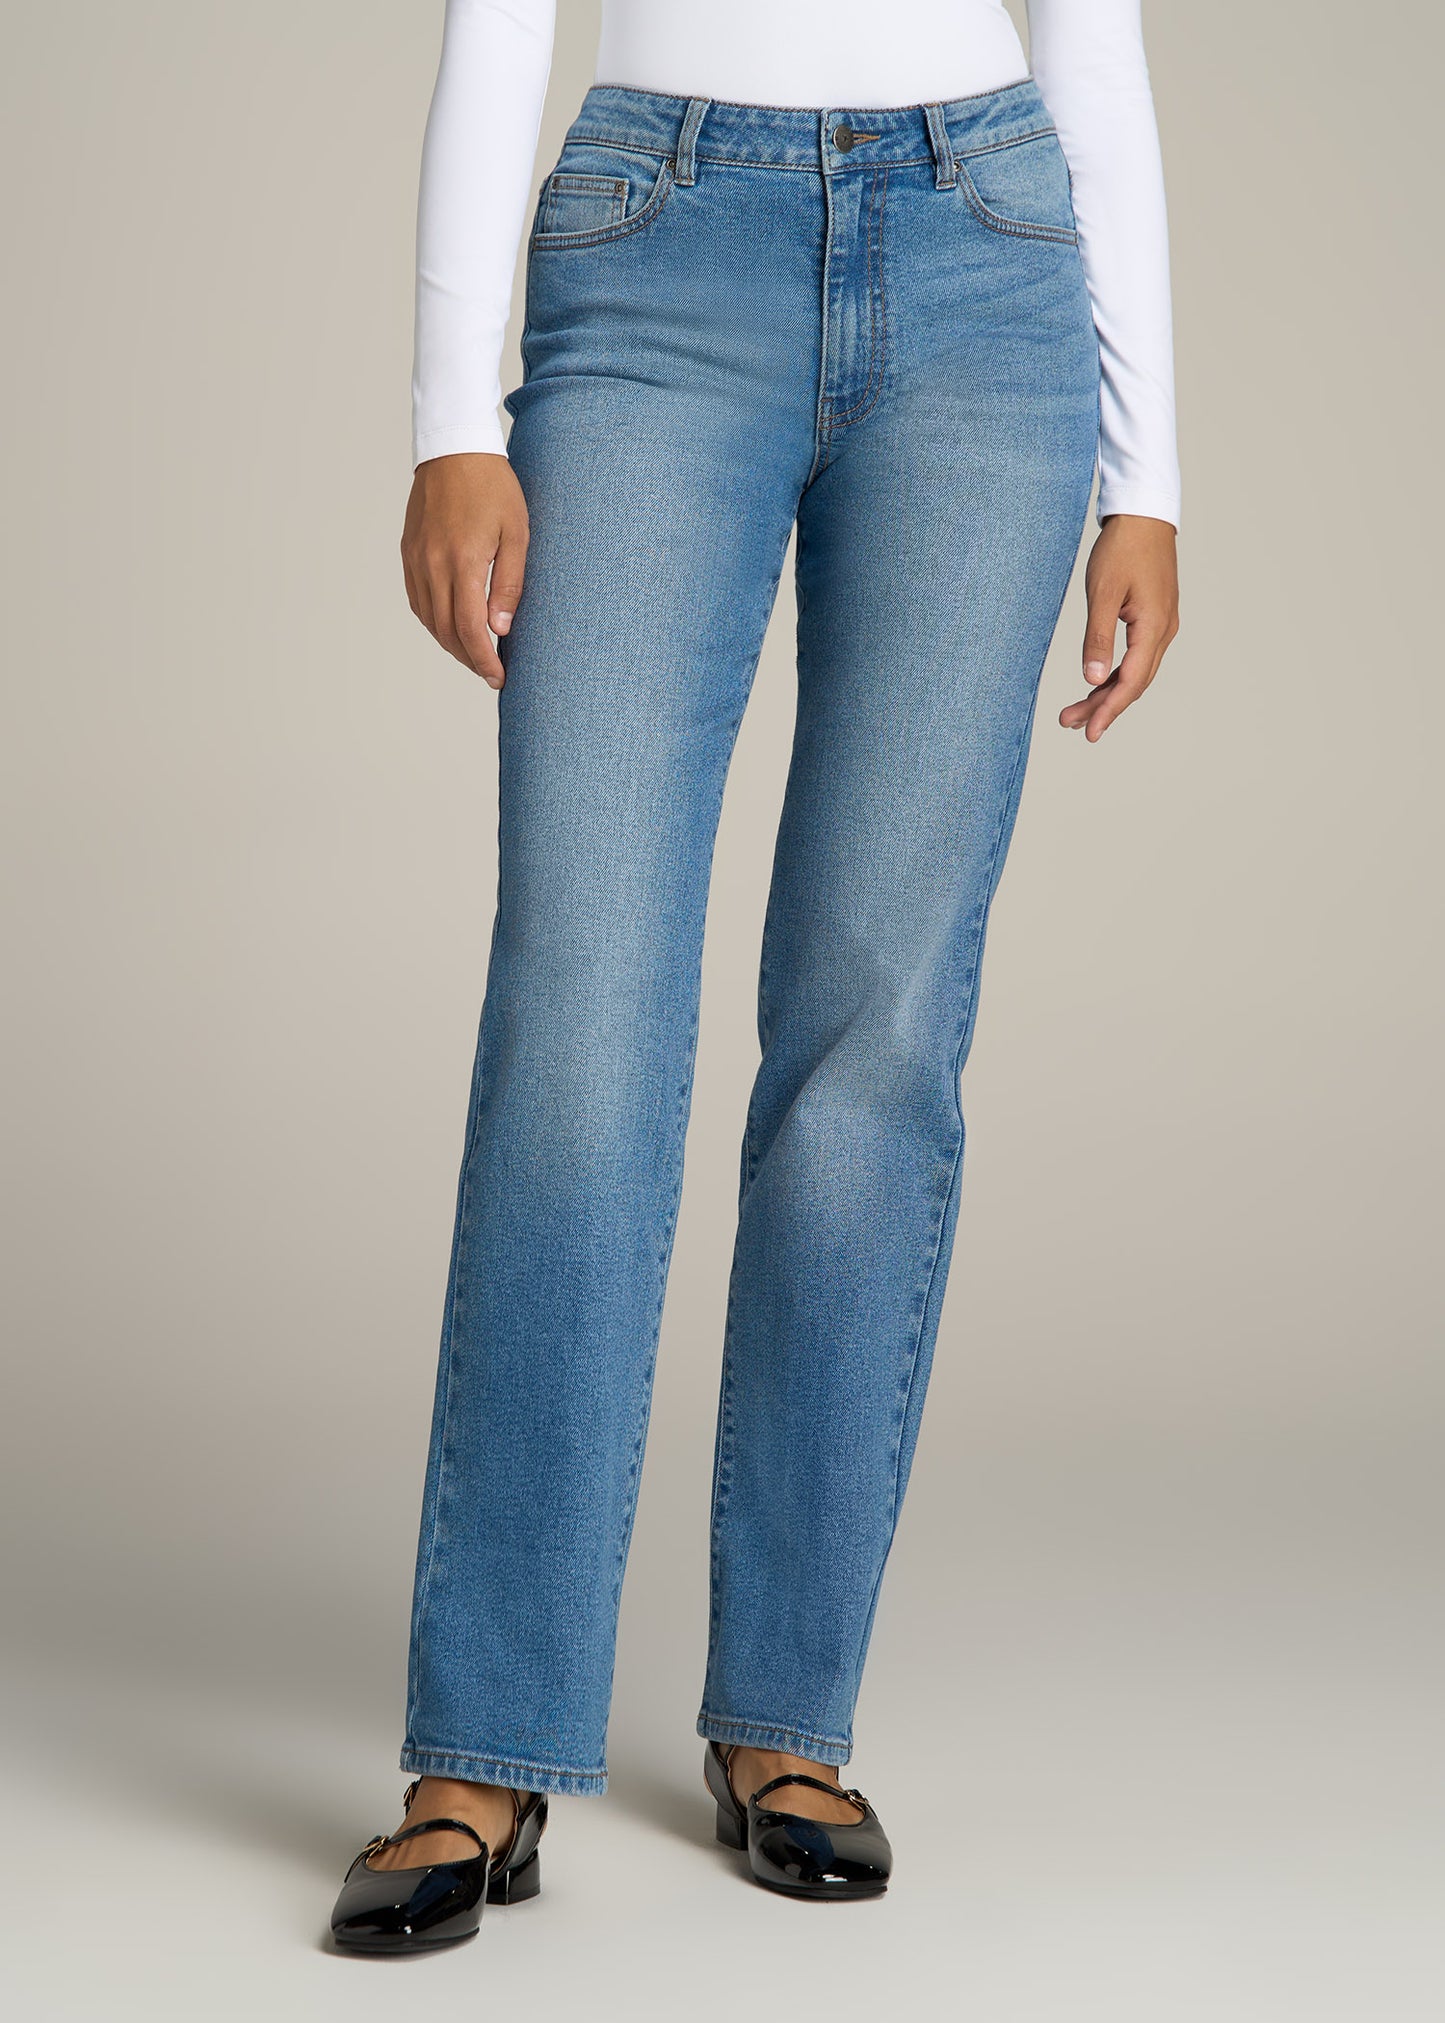 Harper High Rise Straight Stretch Jean in Colorado Blue for Tall Women at American Tall